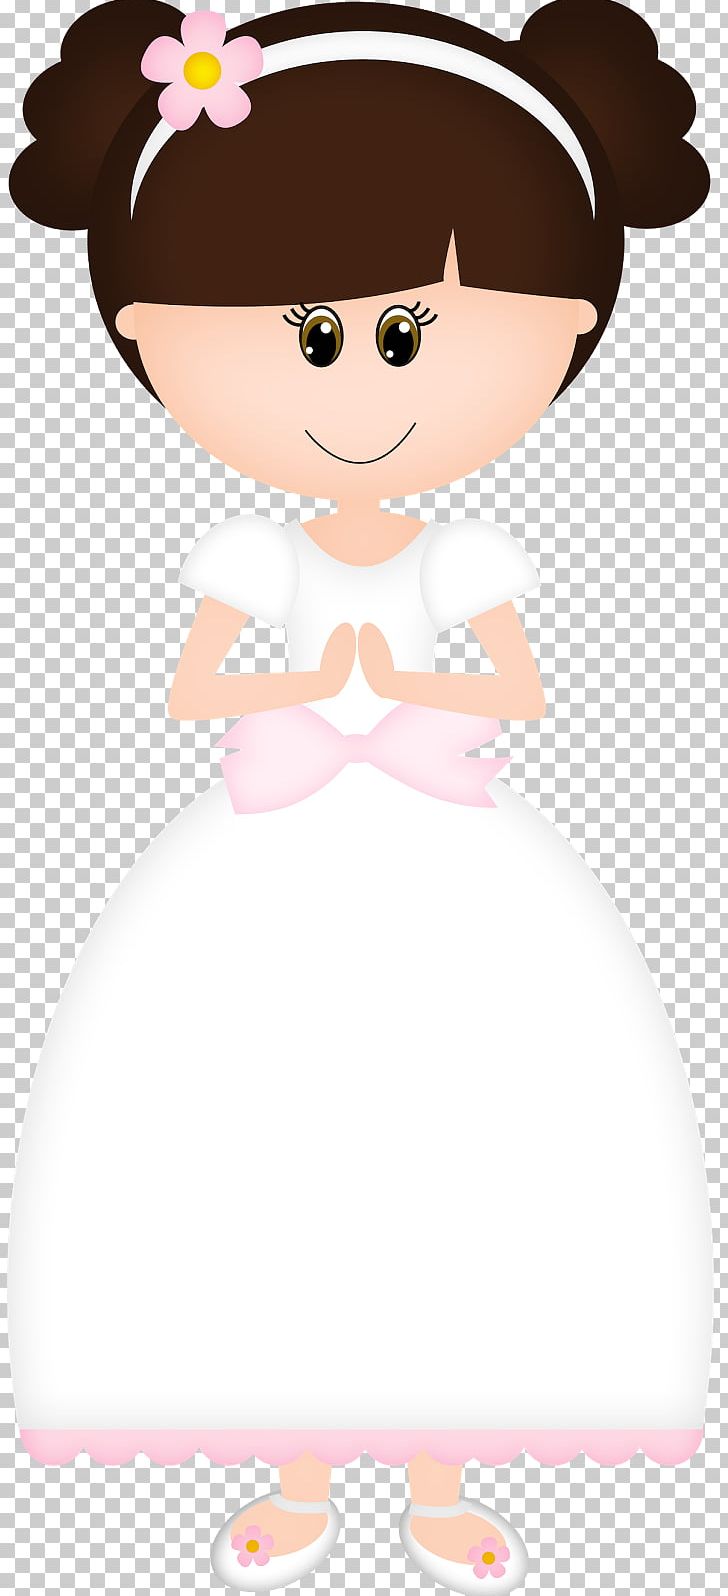 First Communion Convite Baptism Eucharist Paper PNG, Clipart, Art, Beauty, Black Hair, Brown Hair, Cartoon Free PNG Download